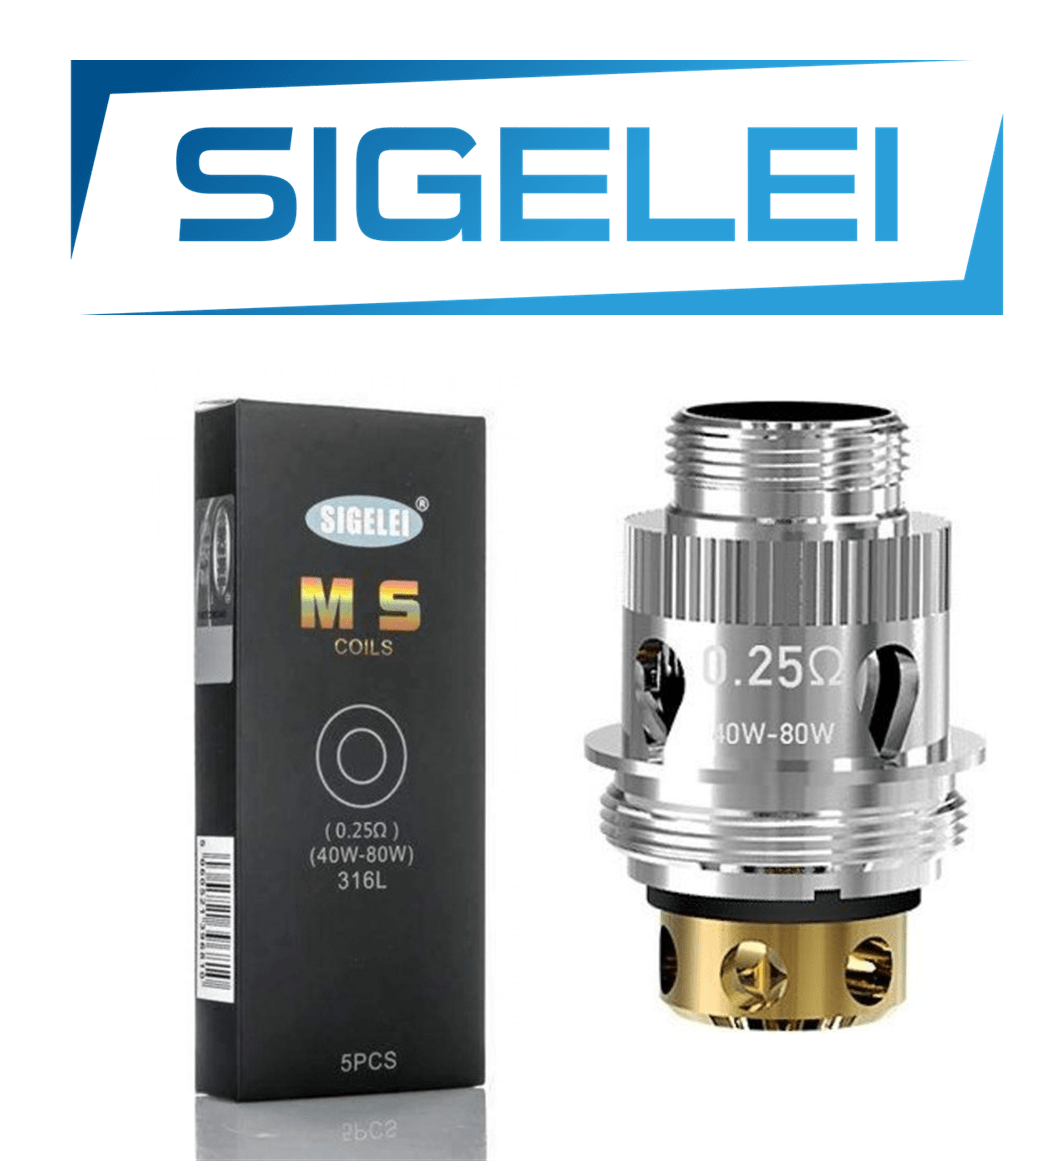 Sigelei MS Coils